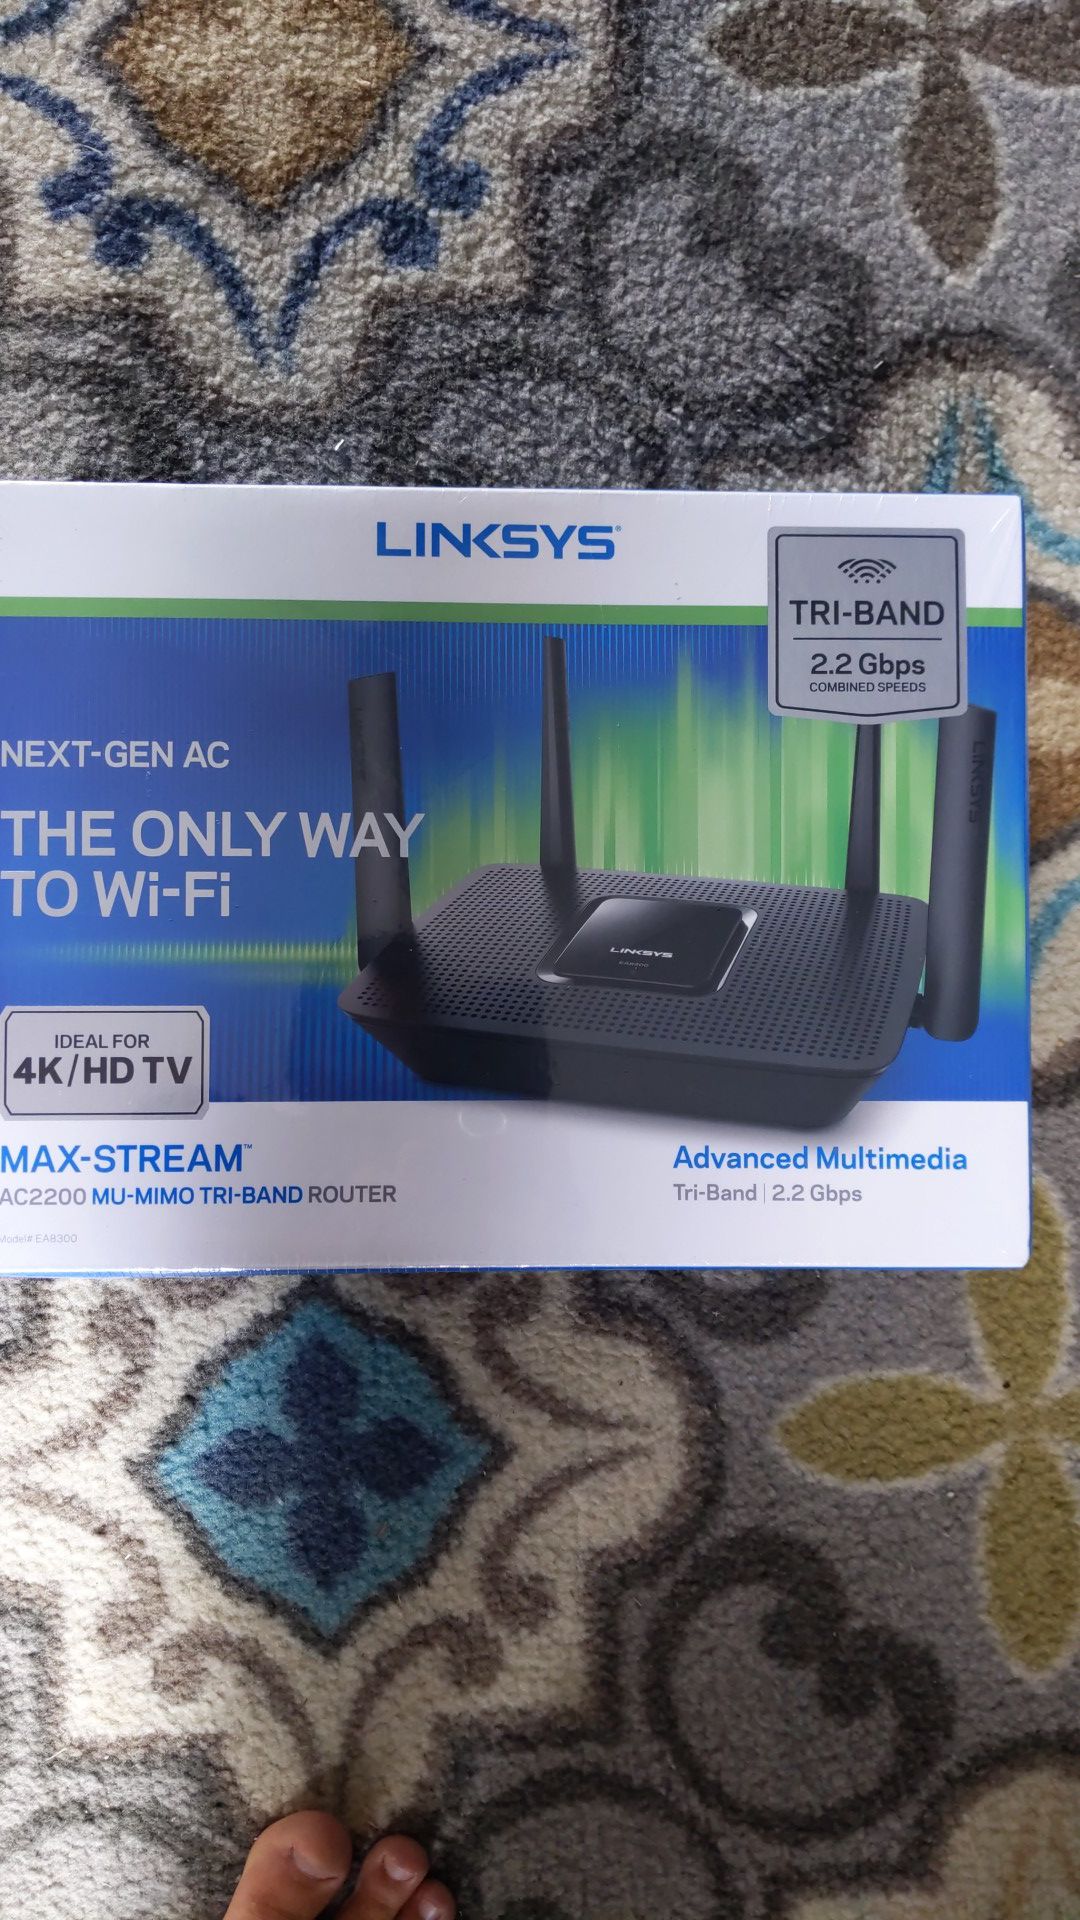 Linksys EA 8300 AC2200 max-stream tri-band wireless router